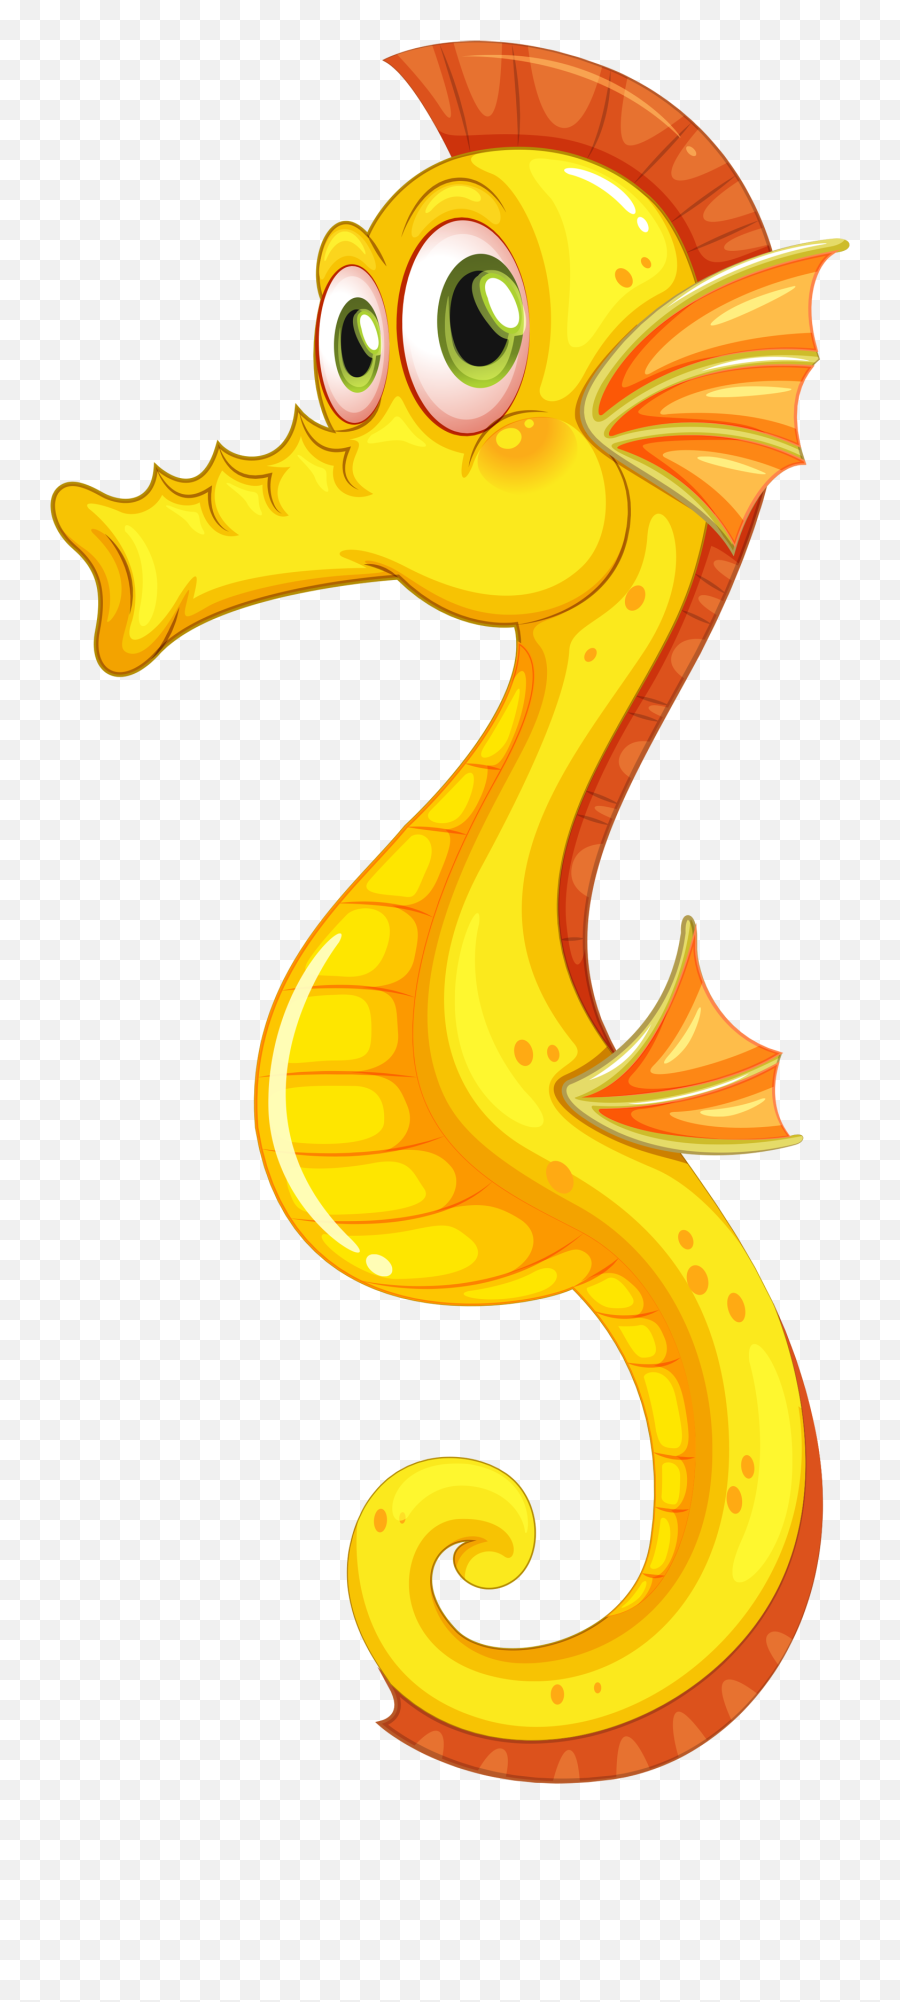 Seahorse Png Biller Free Download 39 Photo - Clipart For Sea Horse Transparent Background,Seahorse Png